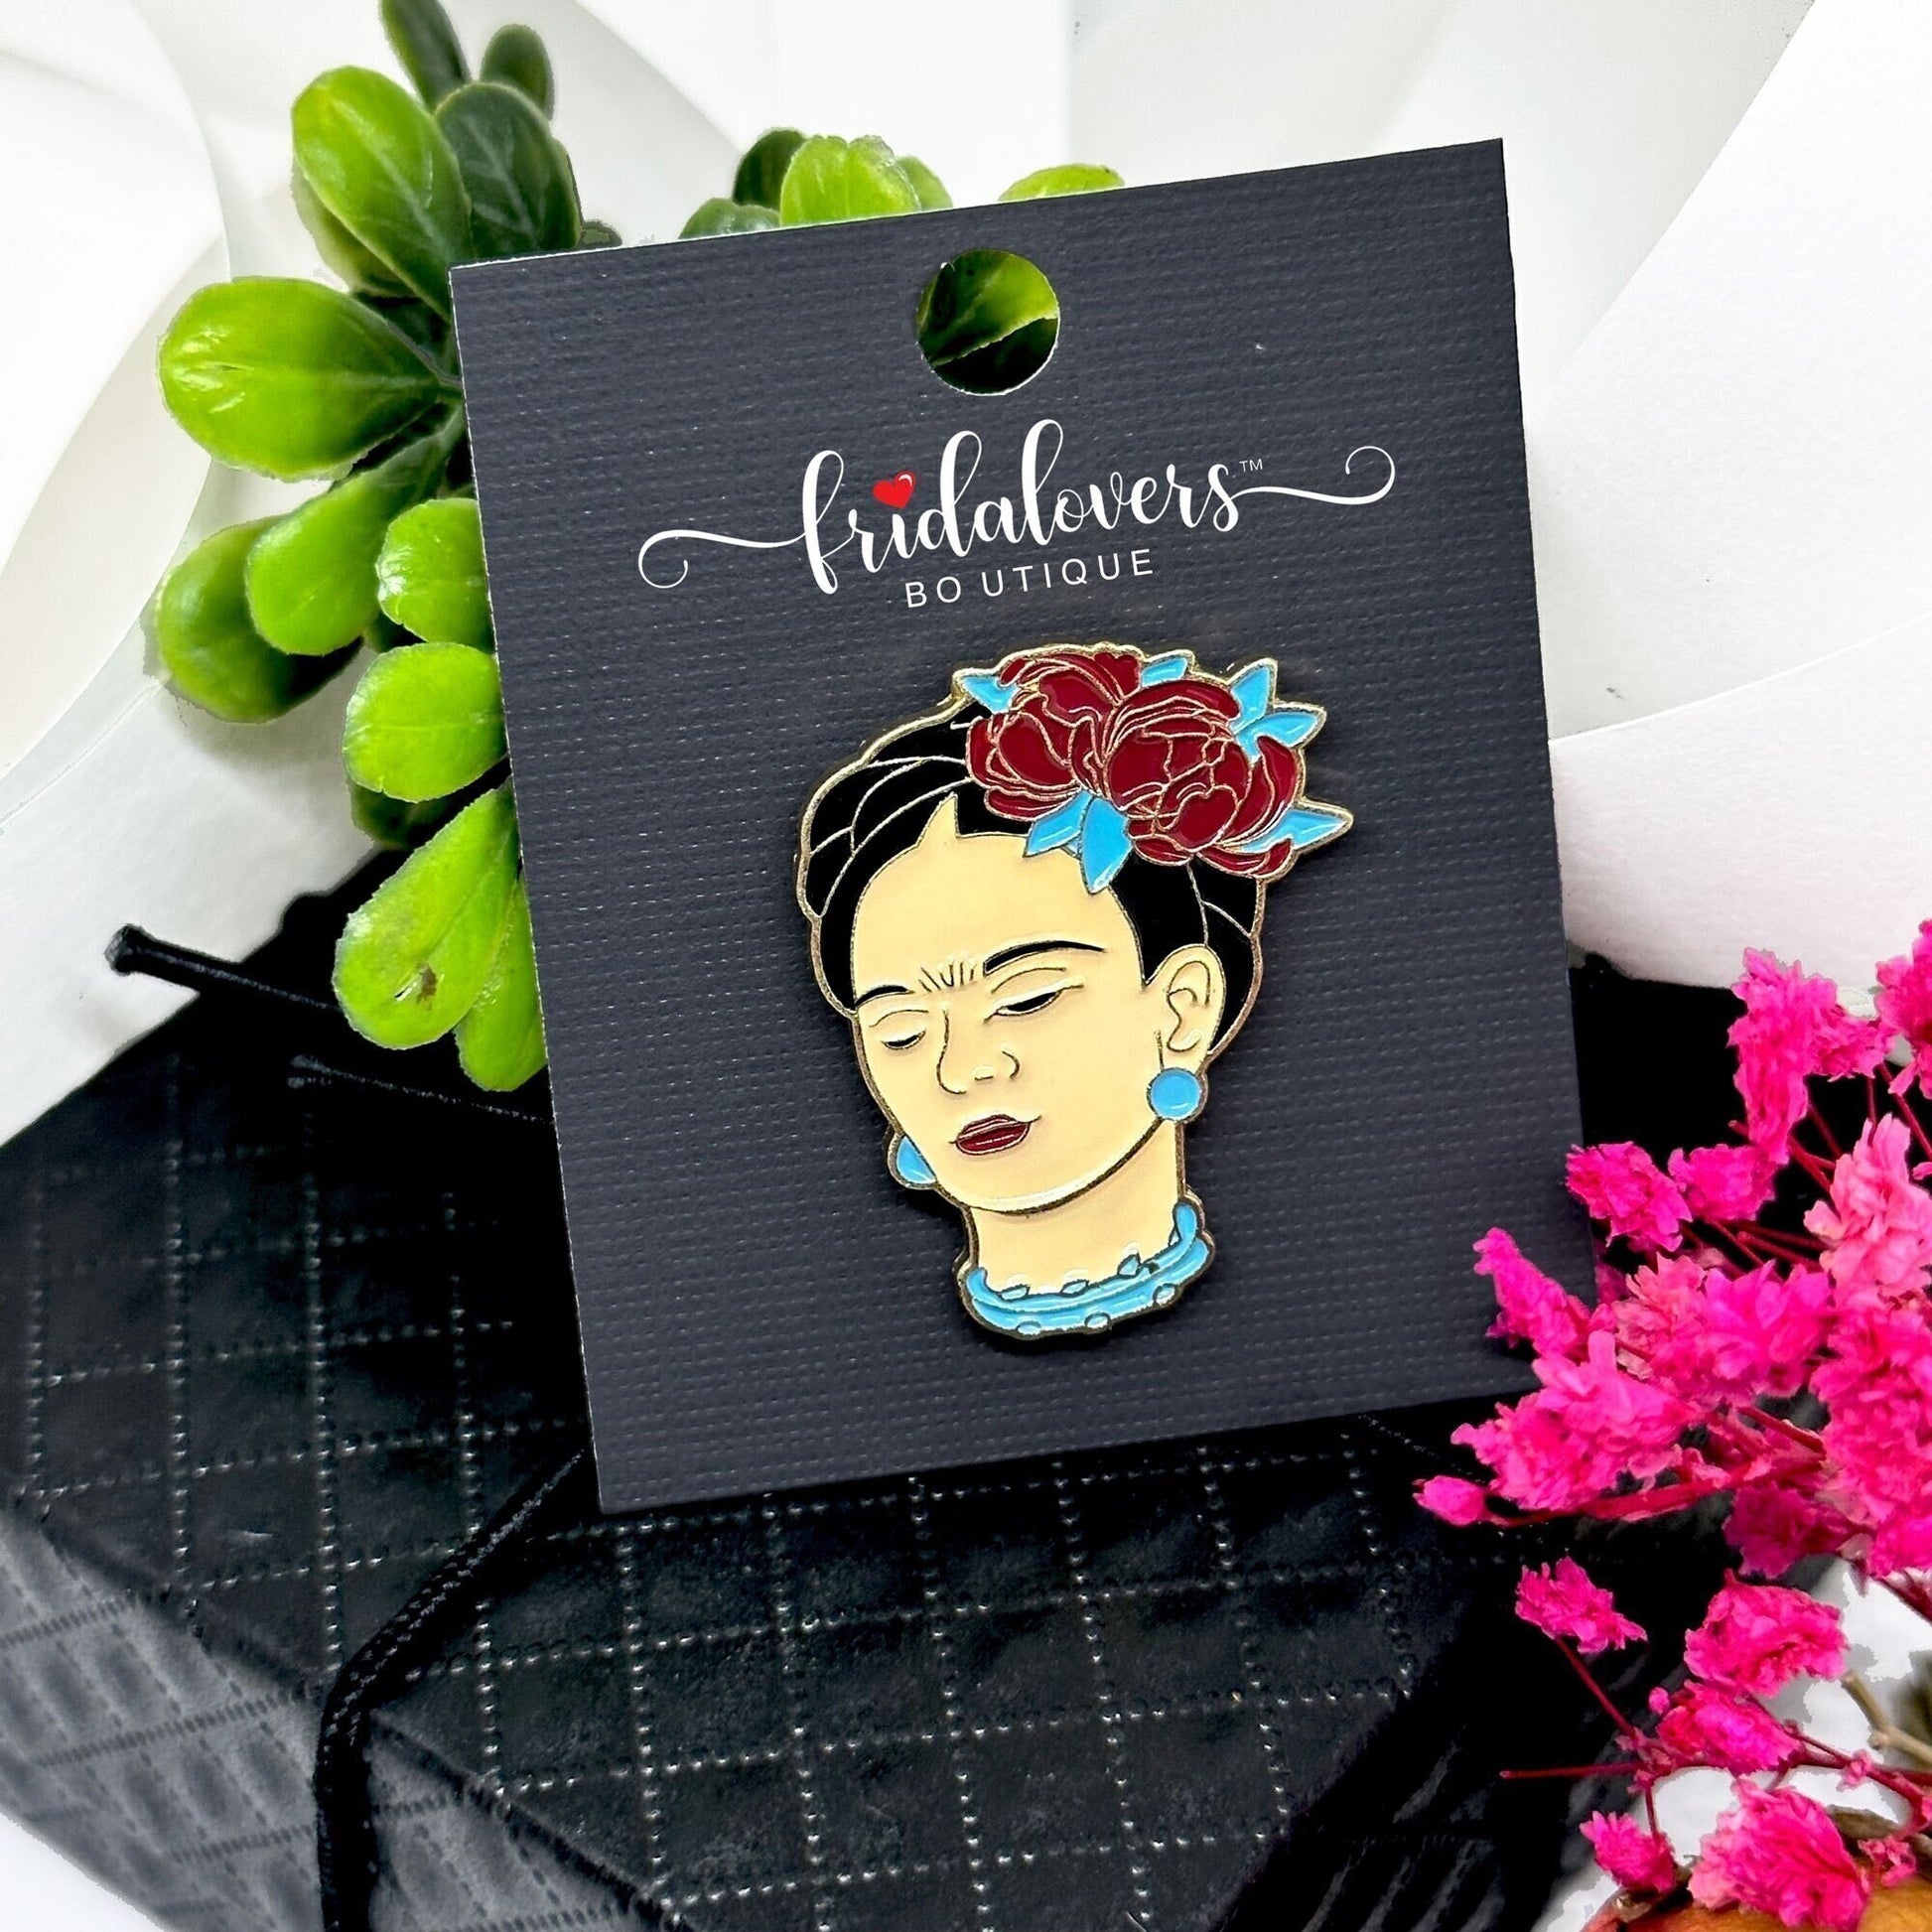 Chic Frida Enamel Pin Mexican Artist Inspired Brooch Floral Women and Girls Frida-Fans Cool Gift Idea Casual Fashion Accessory Broche Mujer